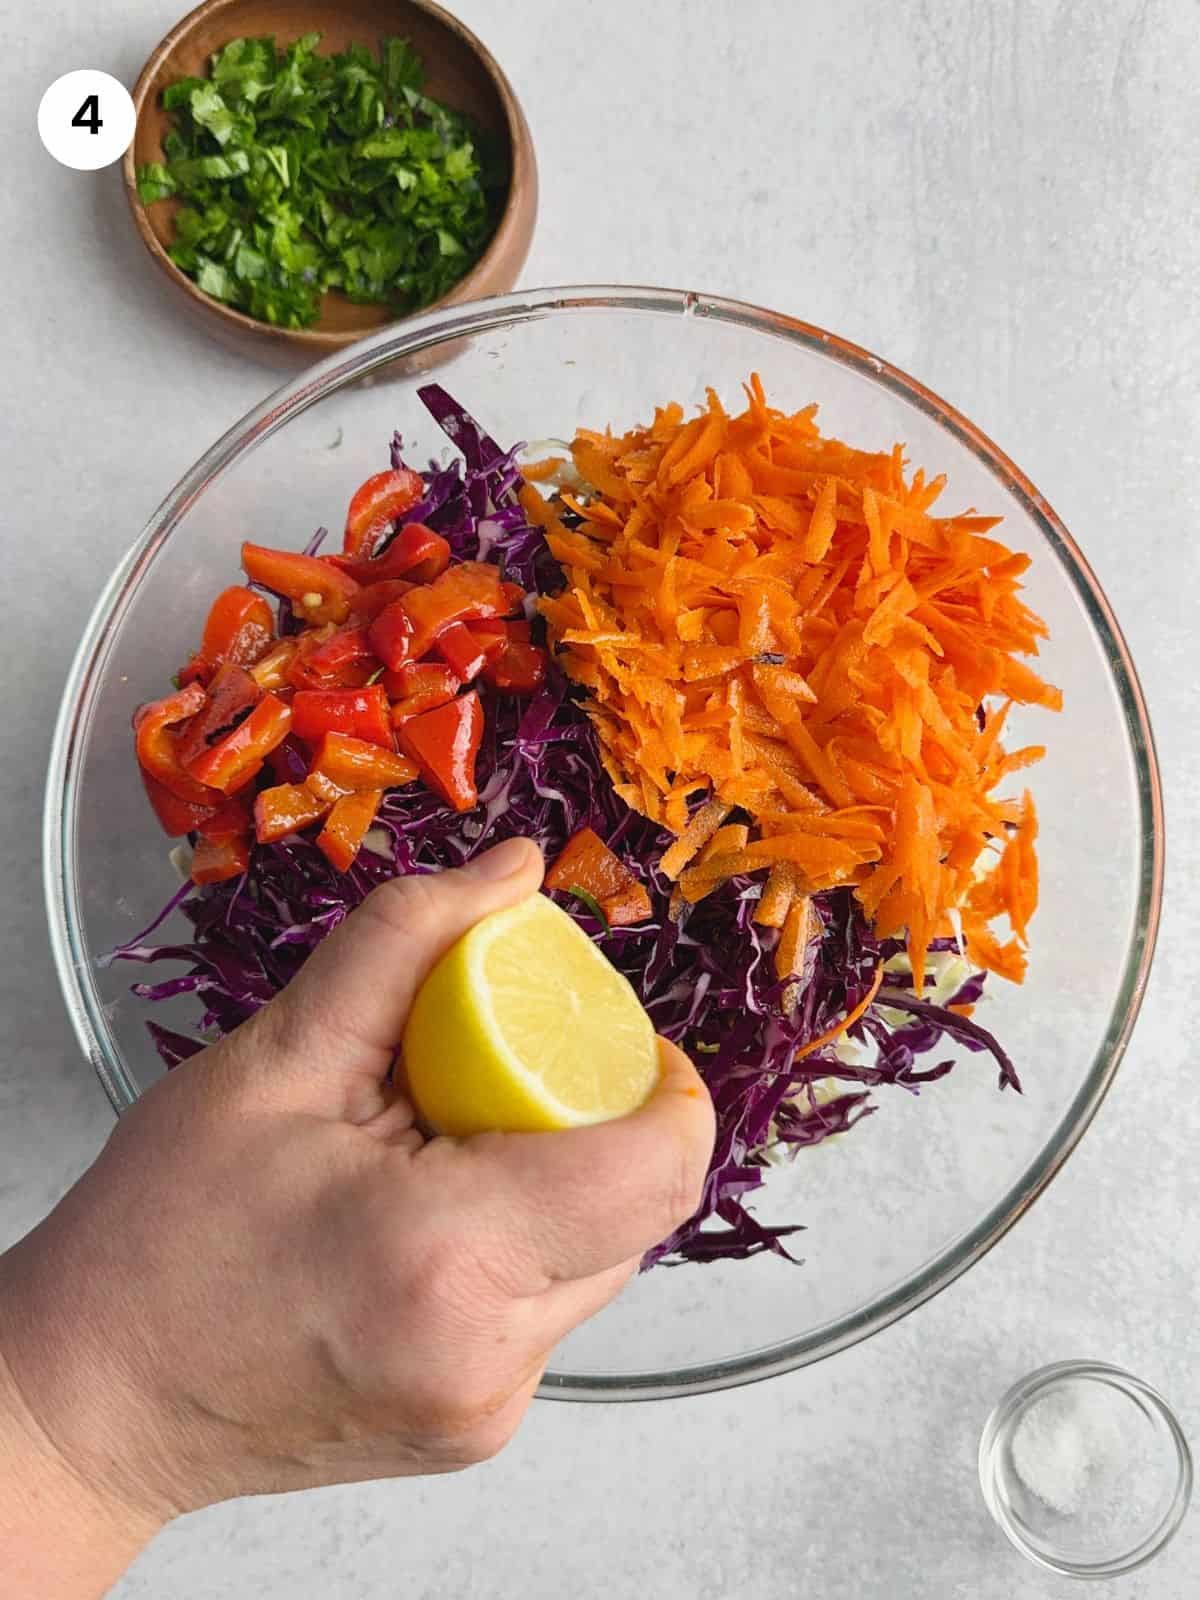 Adding lemon juice to the salad as part of the dressing.